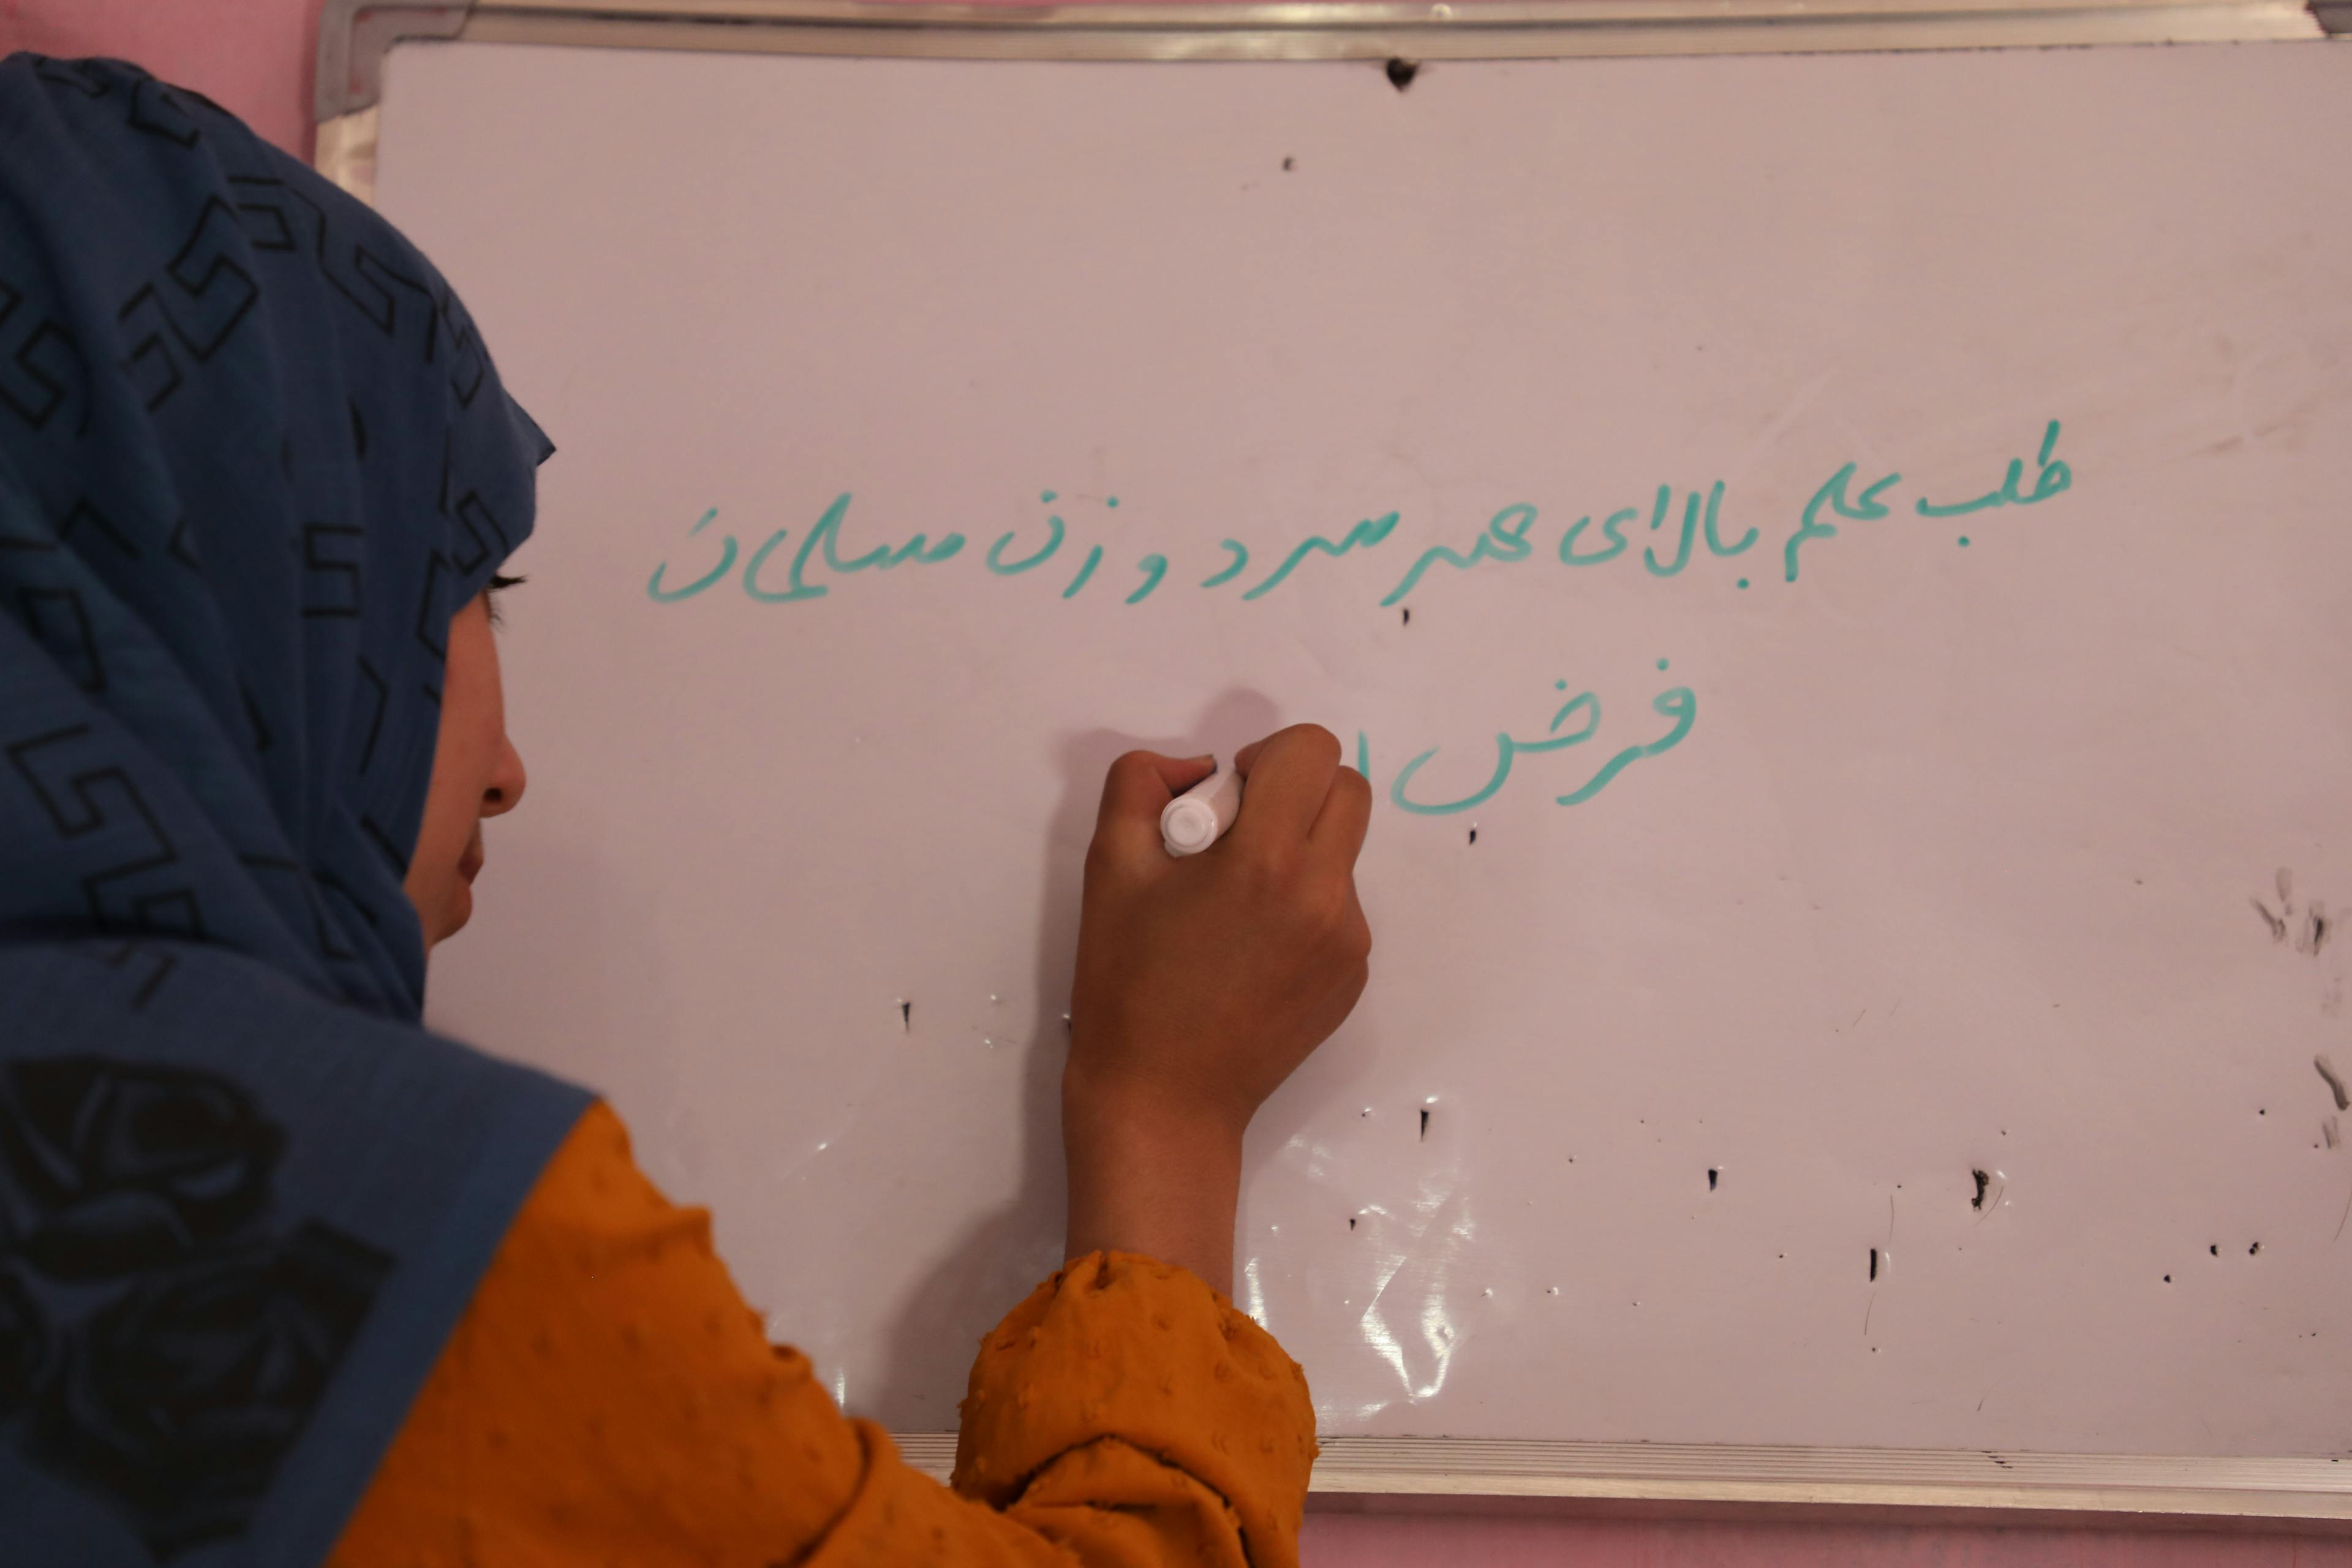 Maryam, 15, was meant to study in the 8th grade before the Taliban announced on 23 March 2022 that schools would not reopen for girls in grades 7-12, while boys in all grades would return to the classroom.